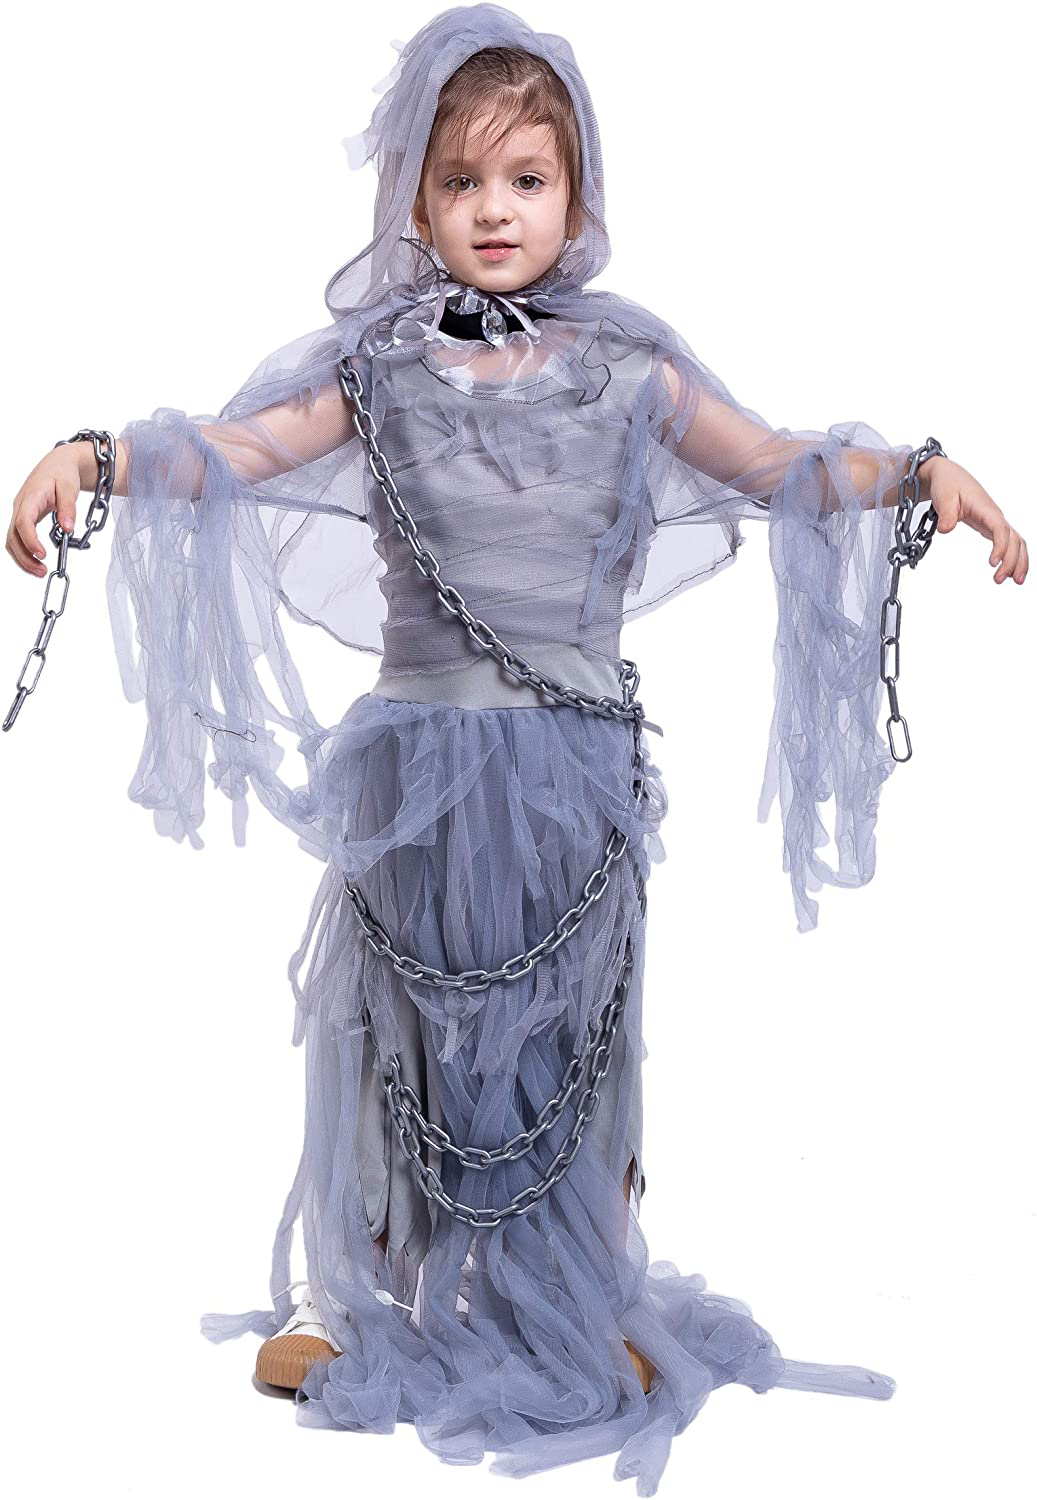 Spooktacular Creations Haunting Beauty Ghost Girl Costume